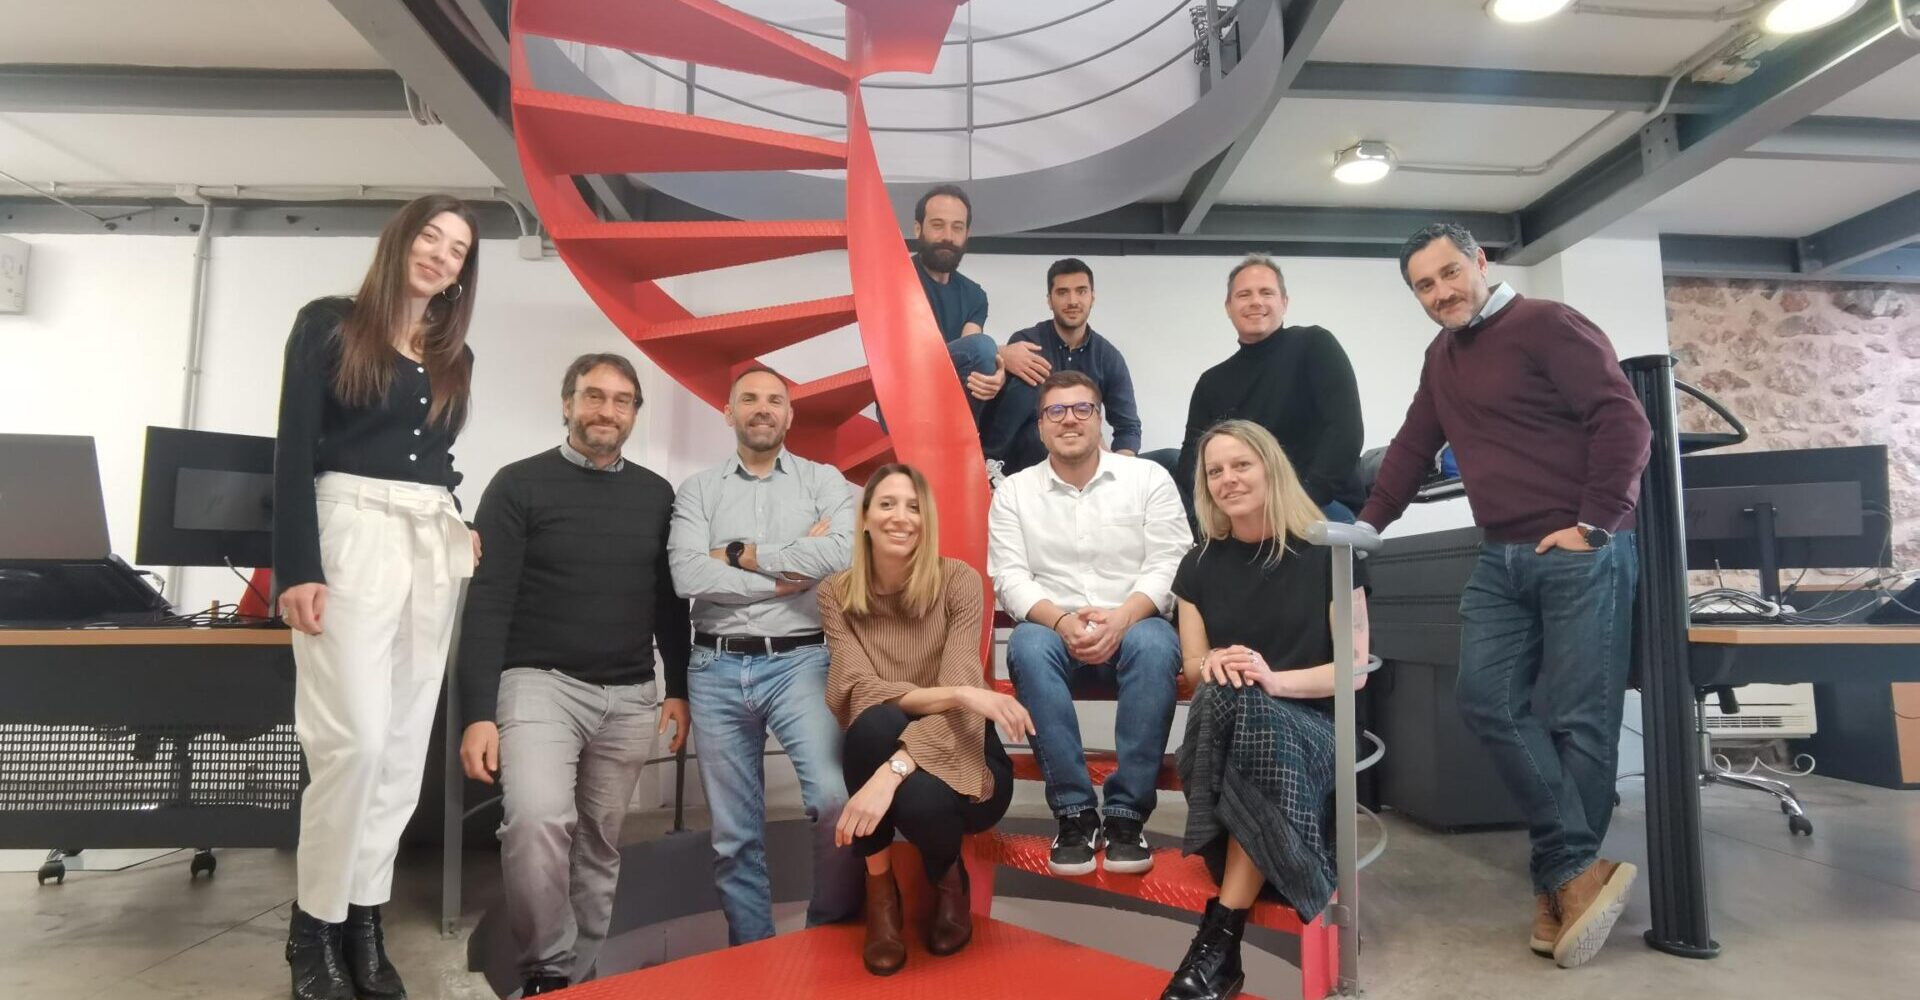 C-Job Athens colleague group photo on spiral staircase